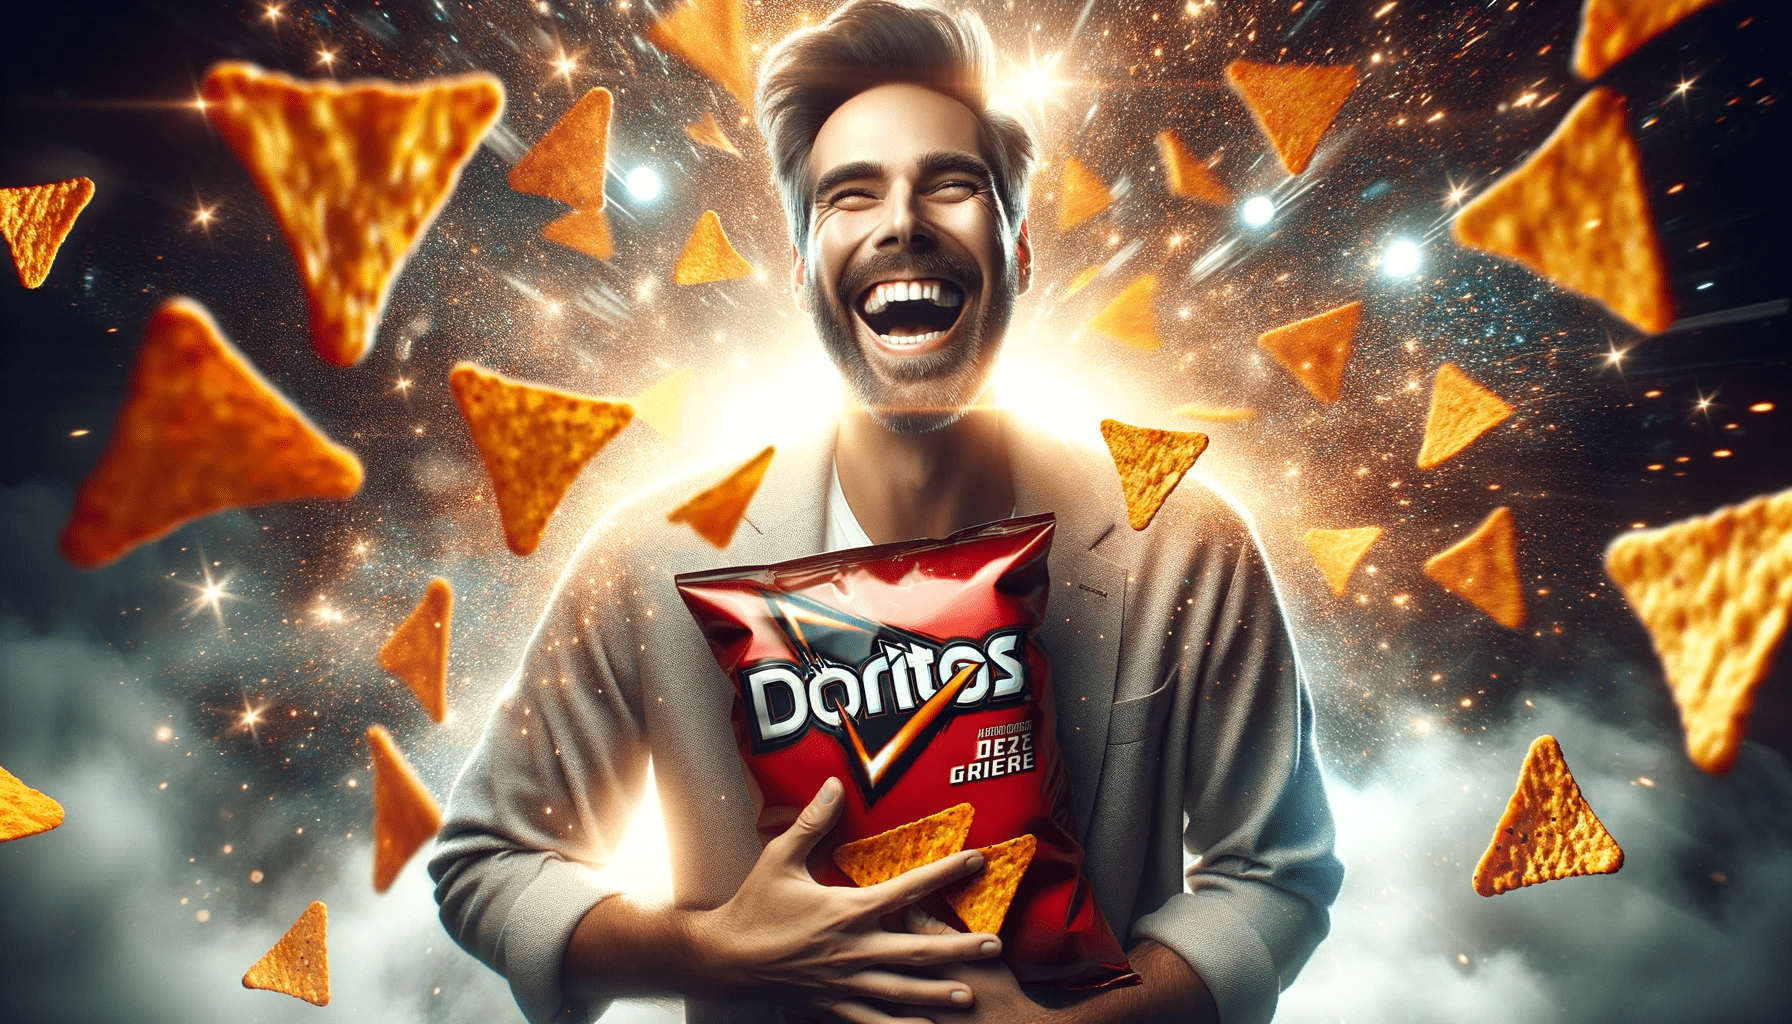 DALL·E 2023-10-25 05.57.37 - 4K detailed portrayal of a joyful man, gleefully holding a bag of Doritos. Amidst the cinematic lighting, a dazzling display of sparkles and dust swir